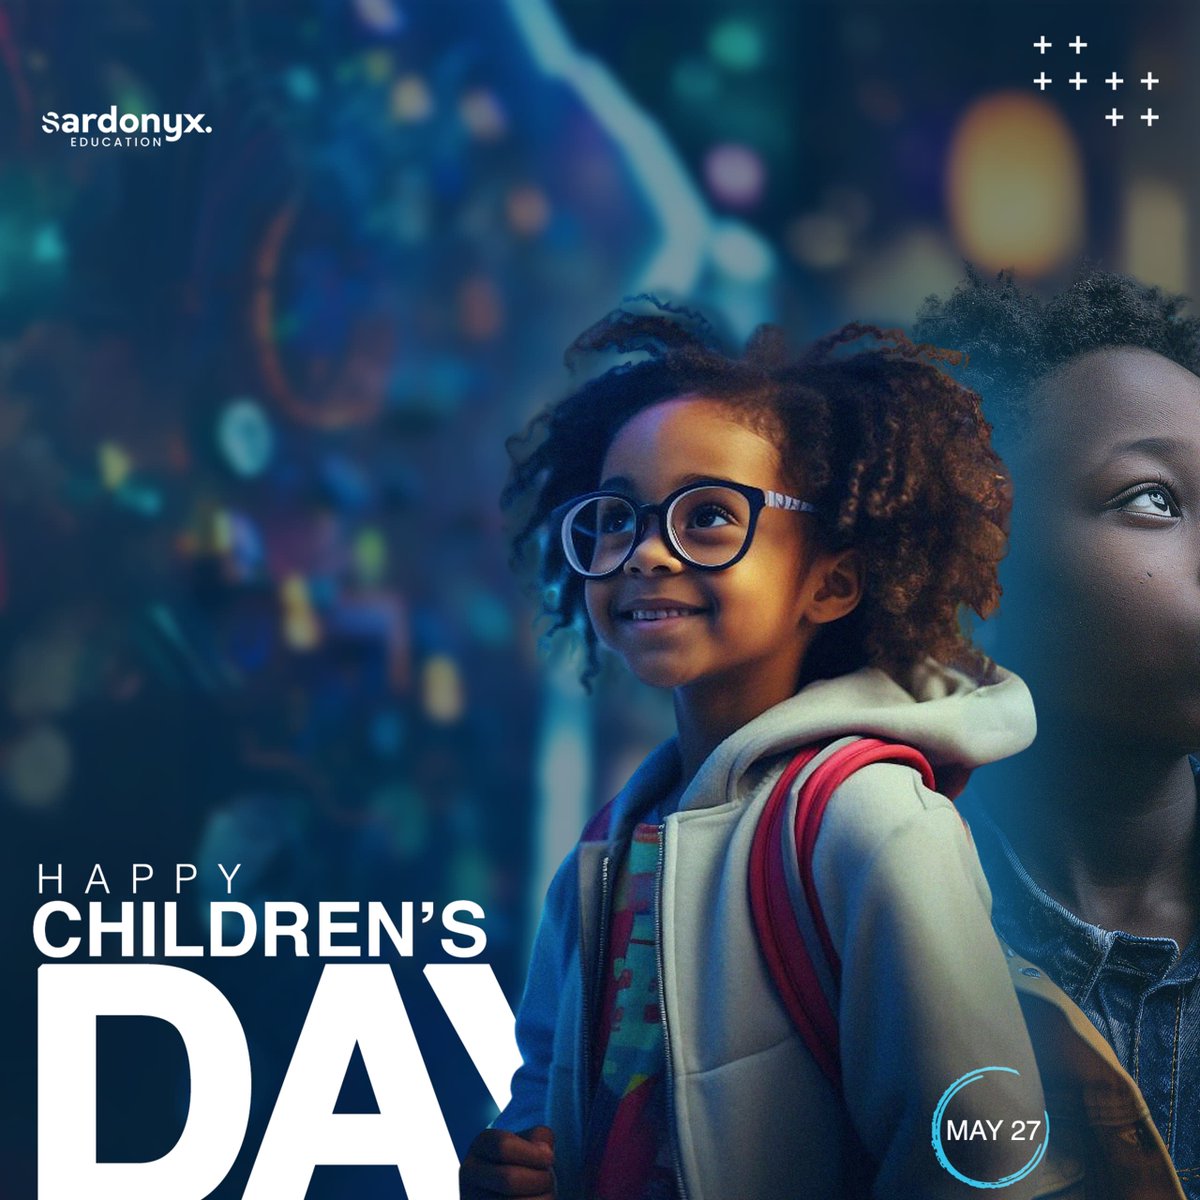 To all the wonderful kids out there, Happy Children's Day! Your smiles bring joy to the world, and your dreams shape the future. Keep shining and never stop dreaming!

#happychildrenday #children #childrenday